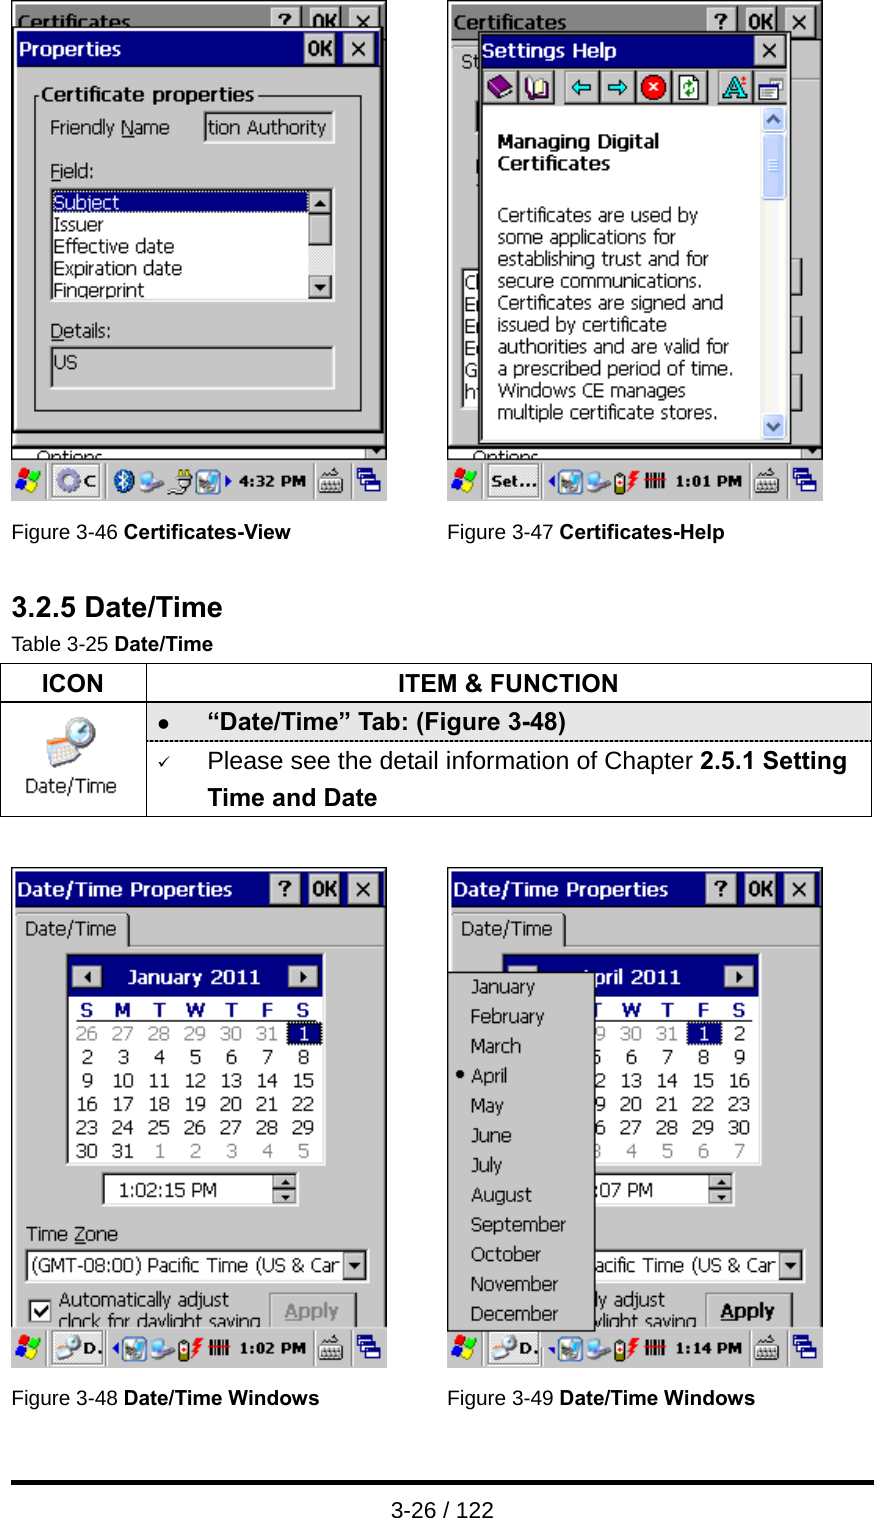  3-26 / 122    Figure 3-46 Certificates-View   Figure 3-47 Certificates-Help  3.2.5 Date/Time Table 3-25 Date/Time ICON  ITEM &amp; FUNCTION z “Date/Time” Tab: (Figure 3-48)    9 Please see the detail information of Chapter 2.5.1 Setting Time and Date      Figure 3-48 Date/Time Windows Figure 3-49 Date/Time Windows 